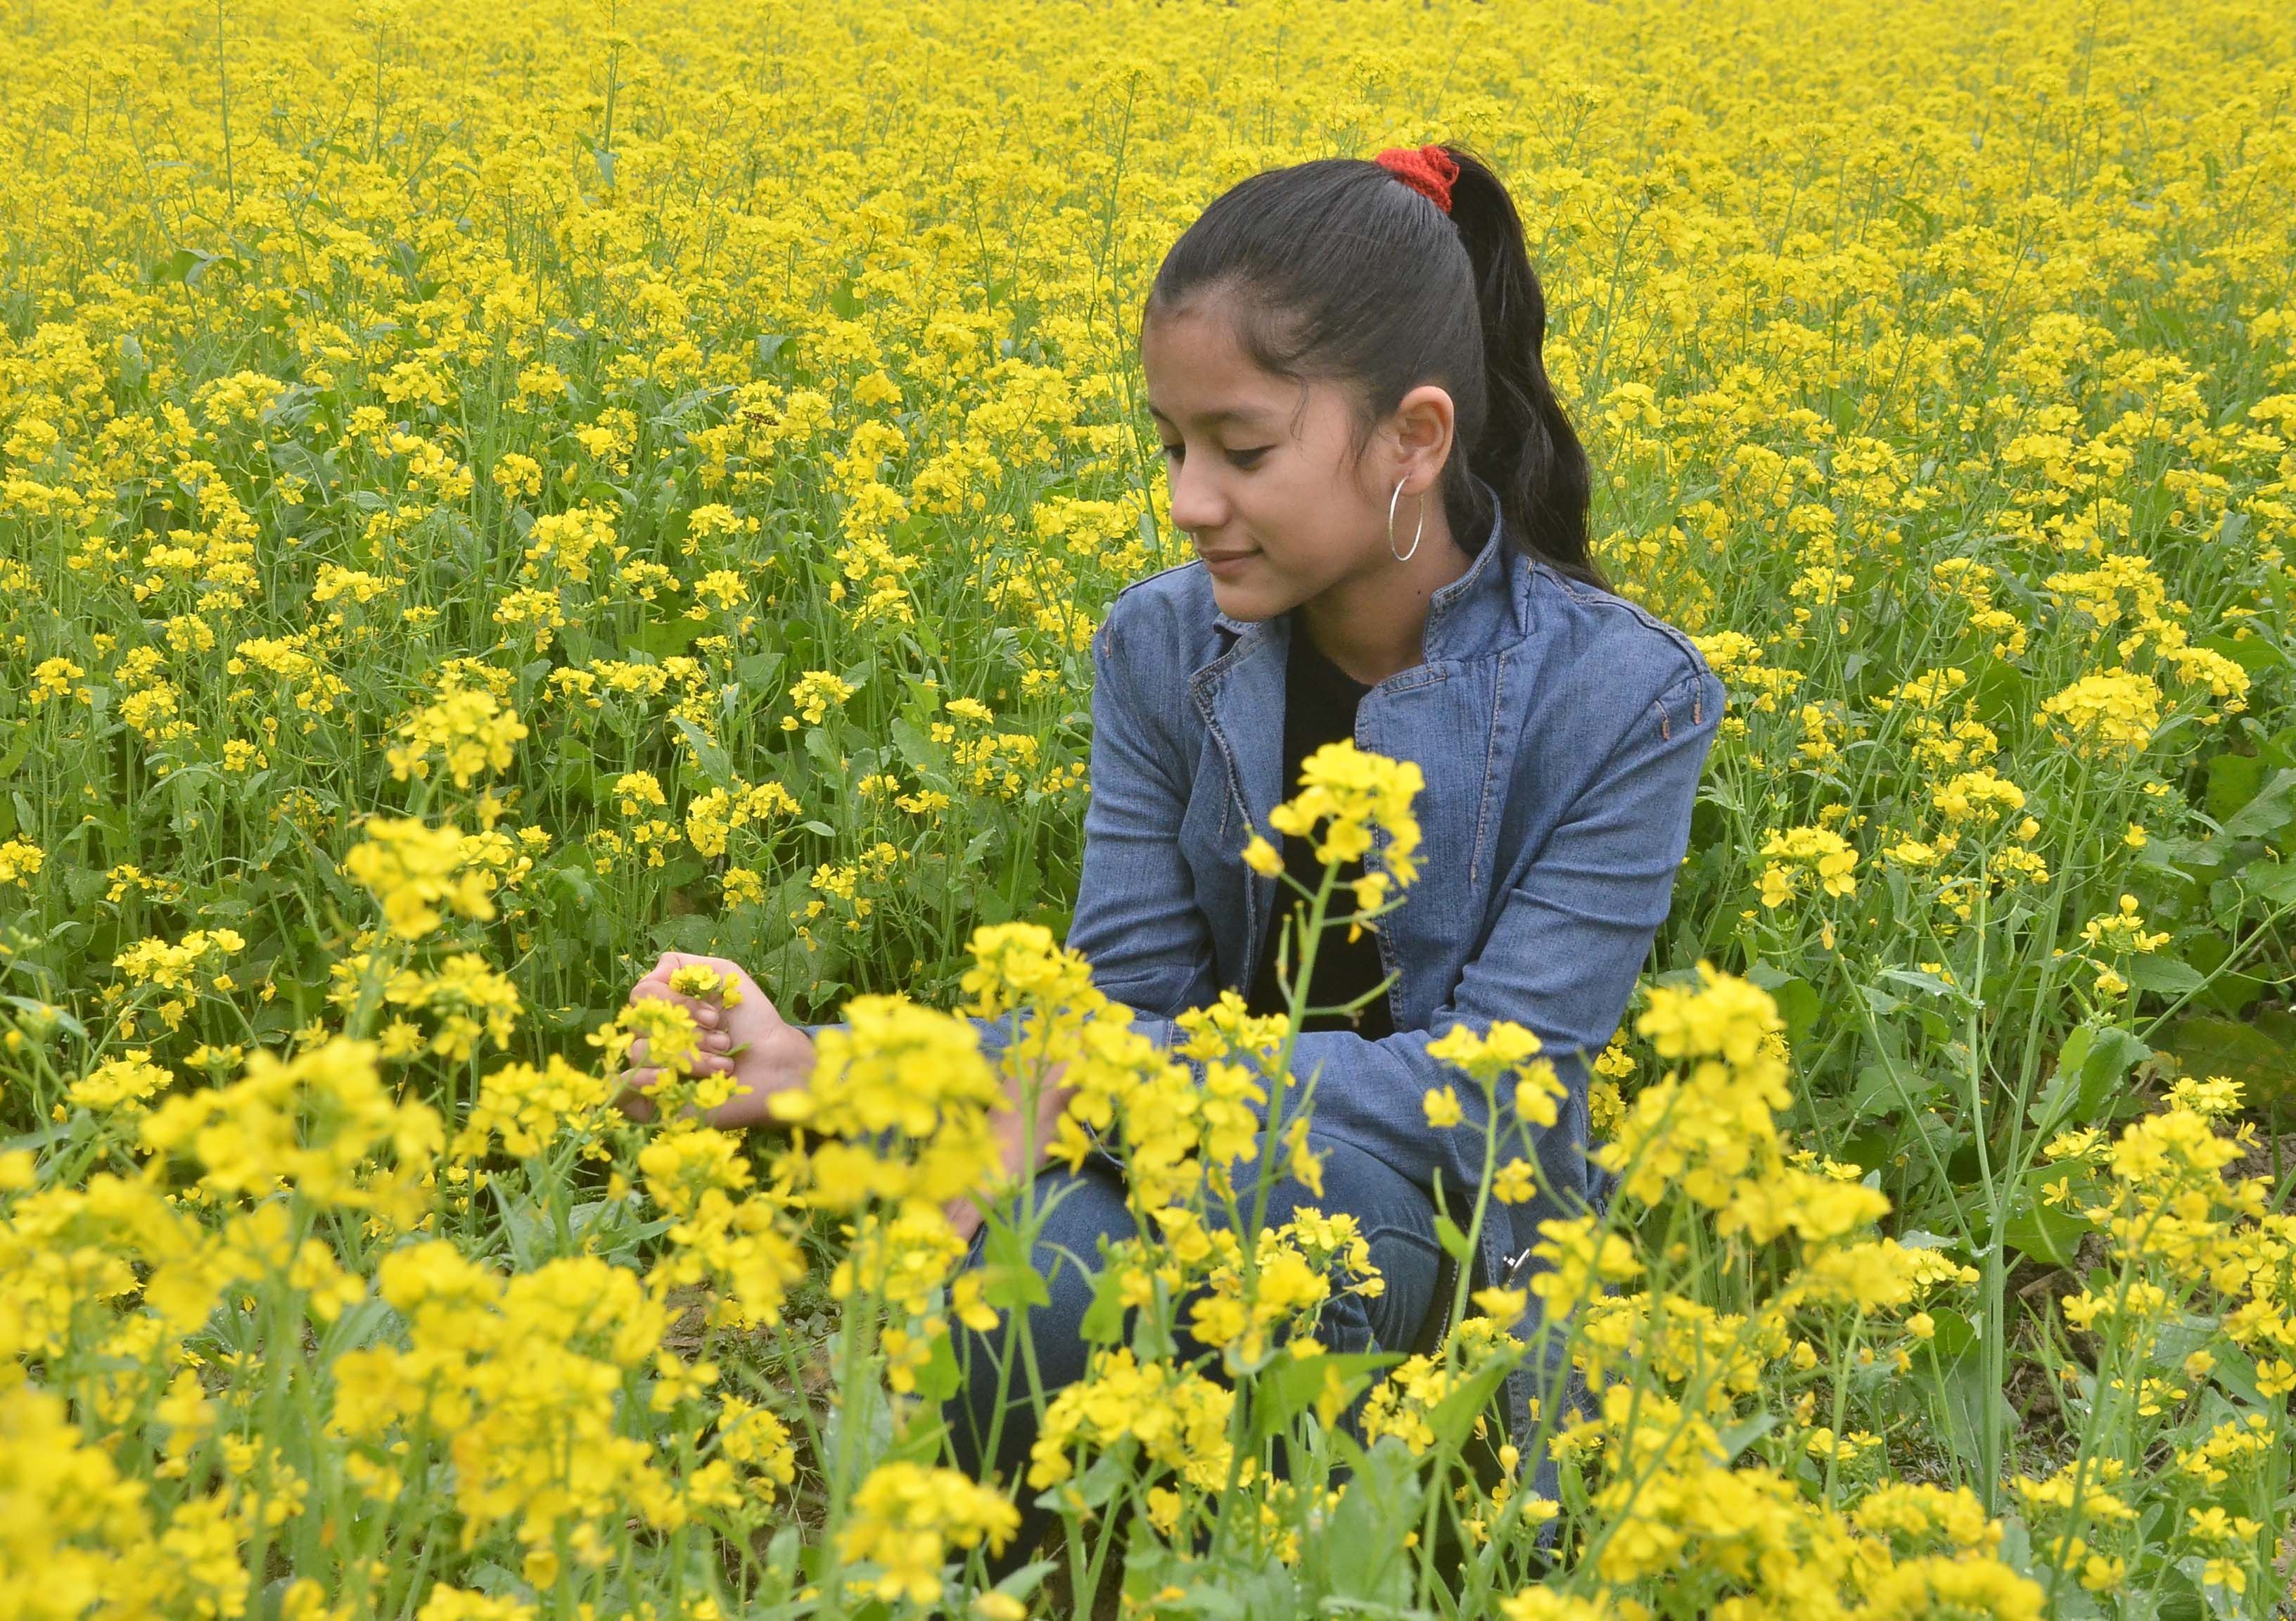 When you stand in the middle of a mustard field, its scent will fascinate you and there is a lot of oxygen in the mustard field during the day. The sweet smell will make you forget the annoyance of urban life.